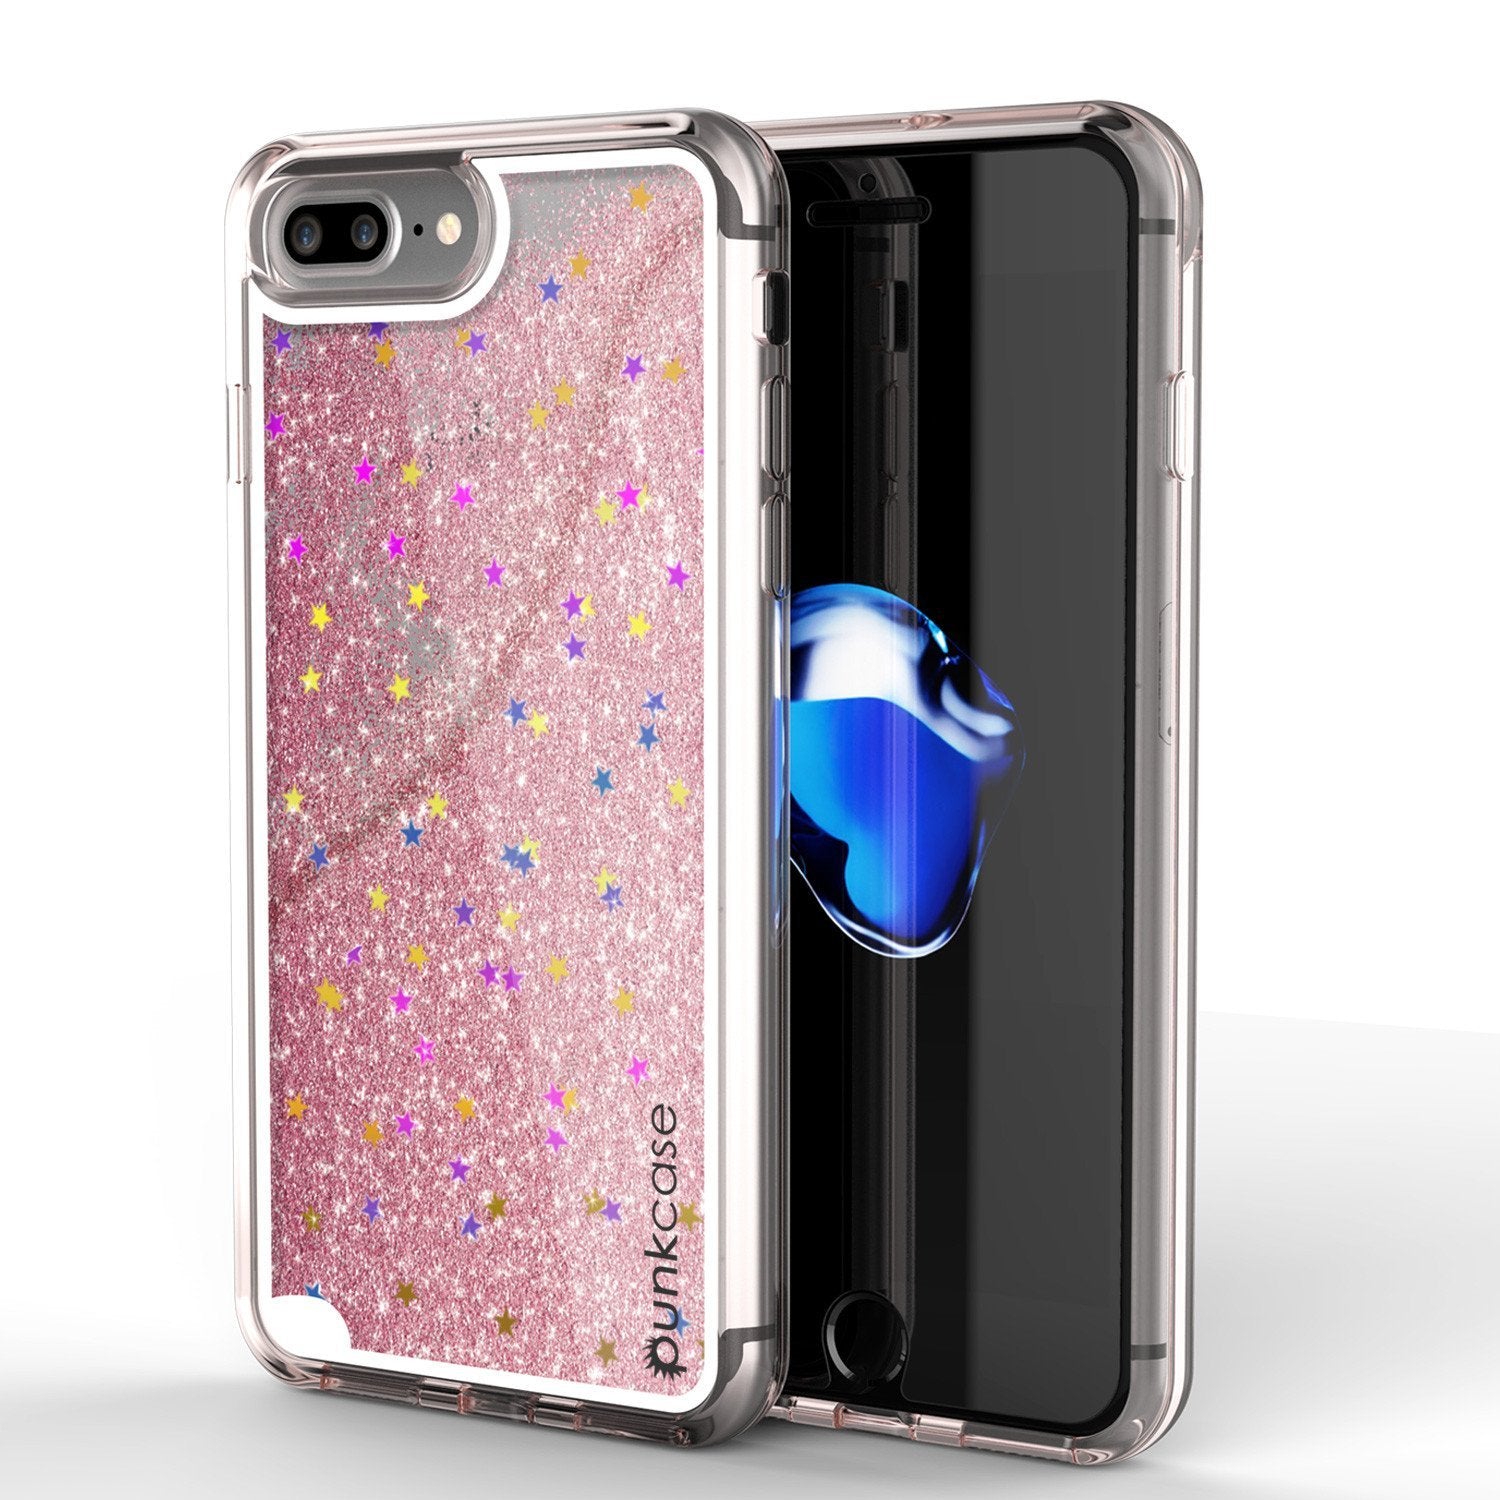 iPhone 8+ Plus Case, PunkCase LIQUID Rose Series, Protective Dual Layer Floating Glitter Cover (Color in image: rose)